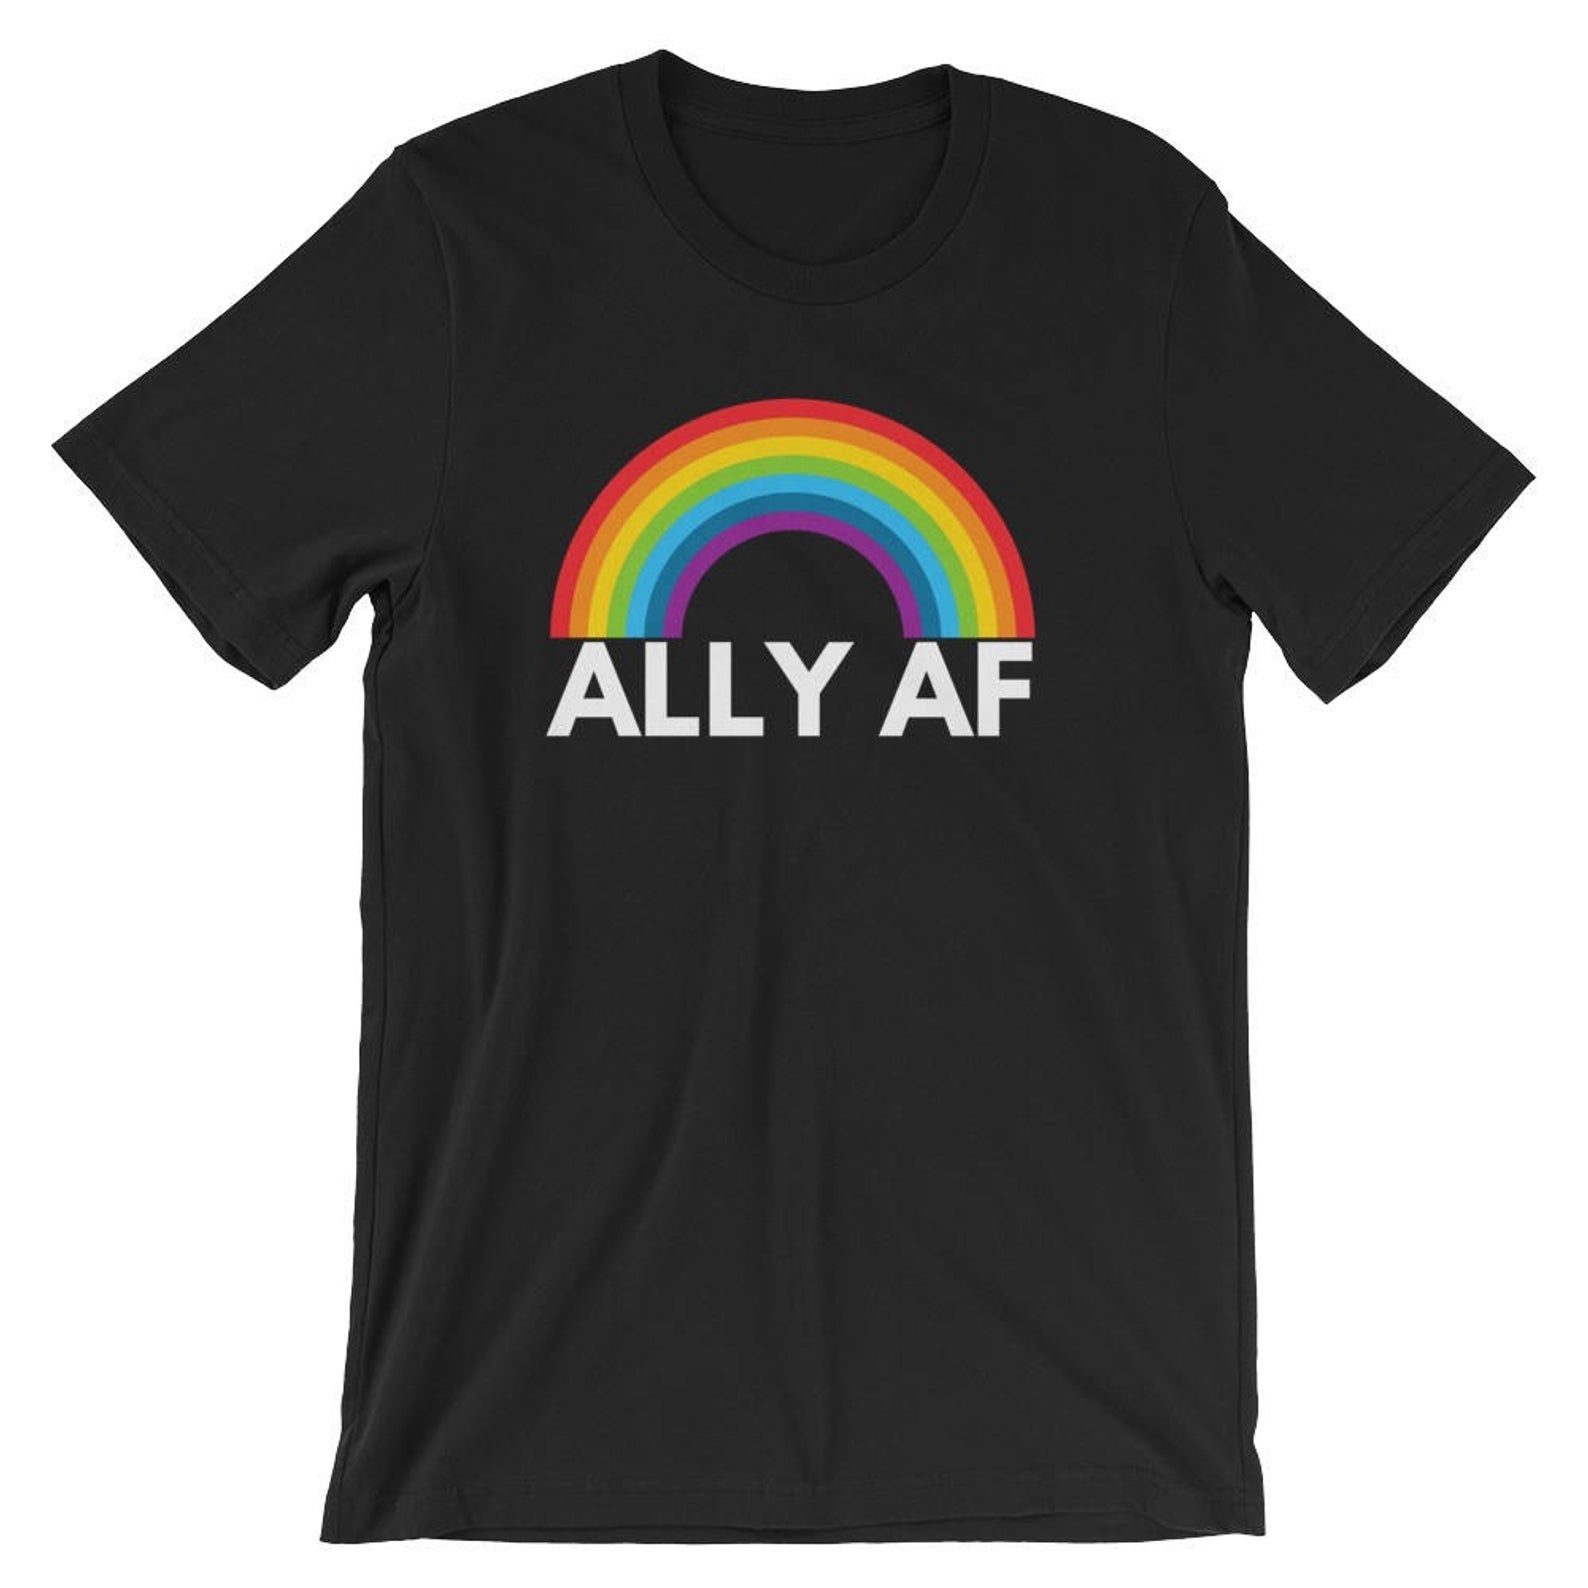 These Are The Only Tees You Need to Celebrate Pride Month | Essence